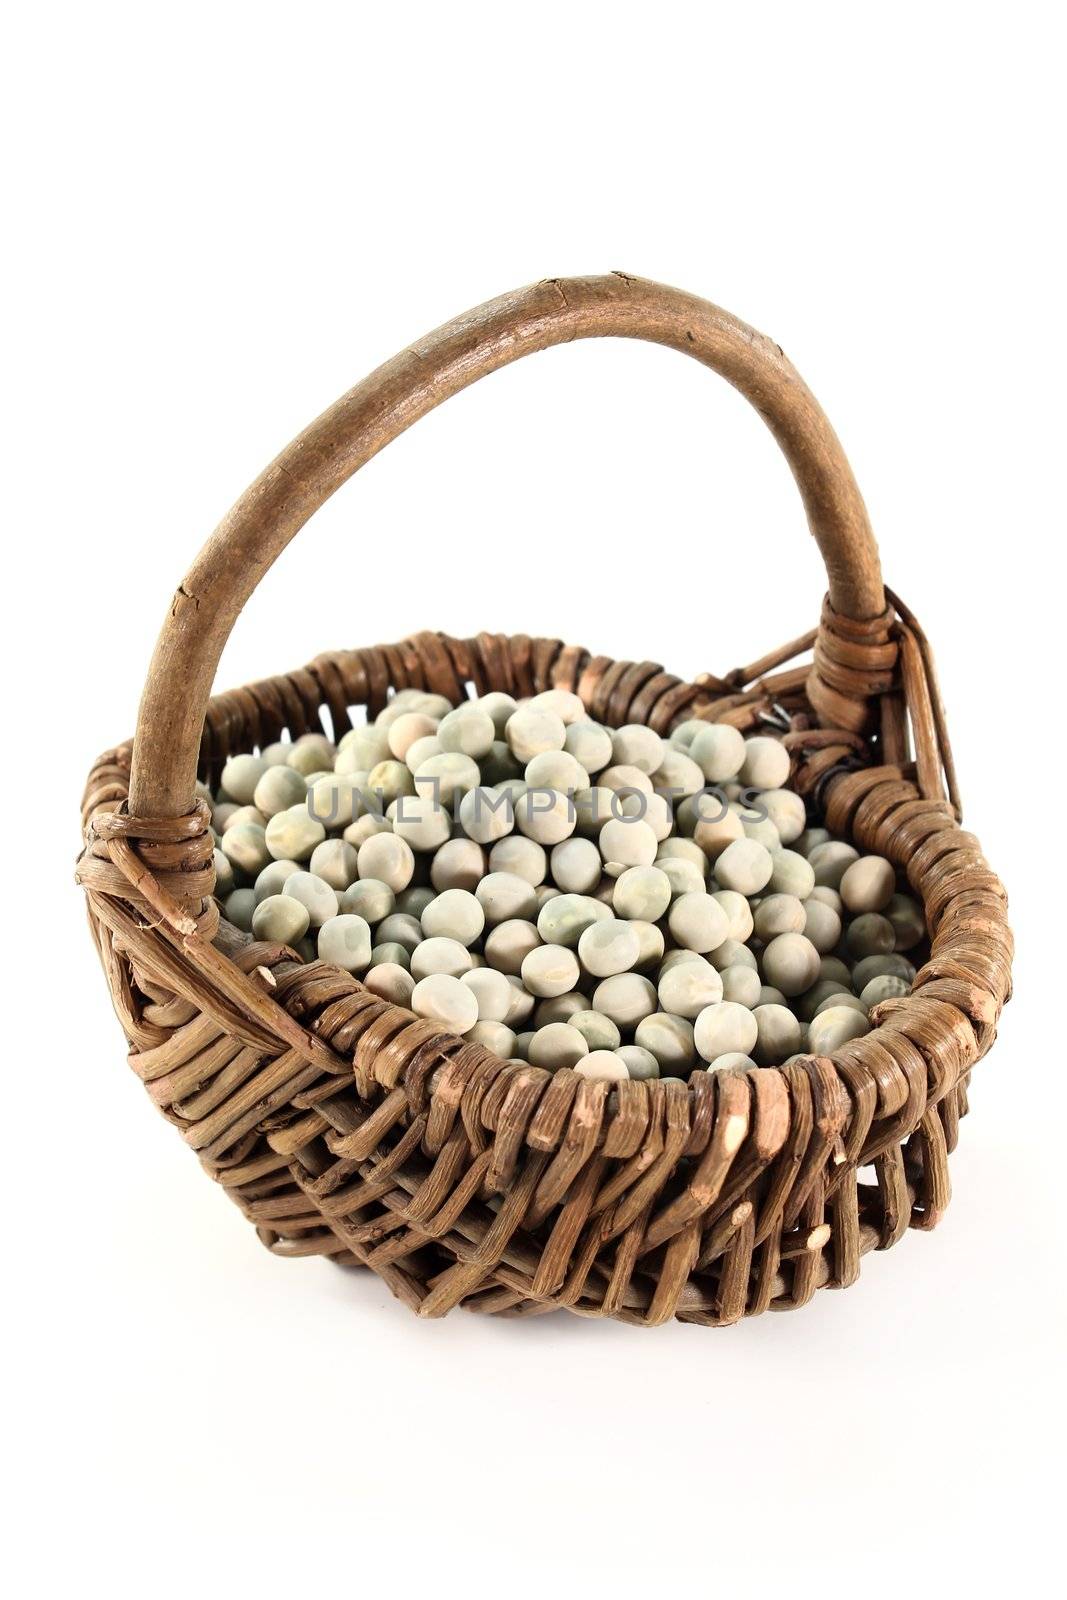 dried green peas in a basket on a white background